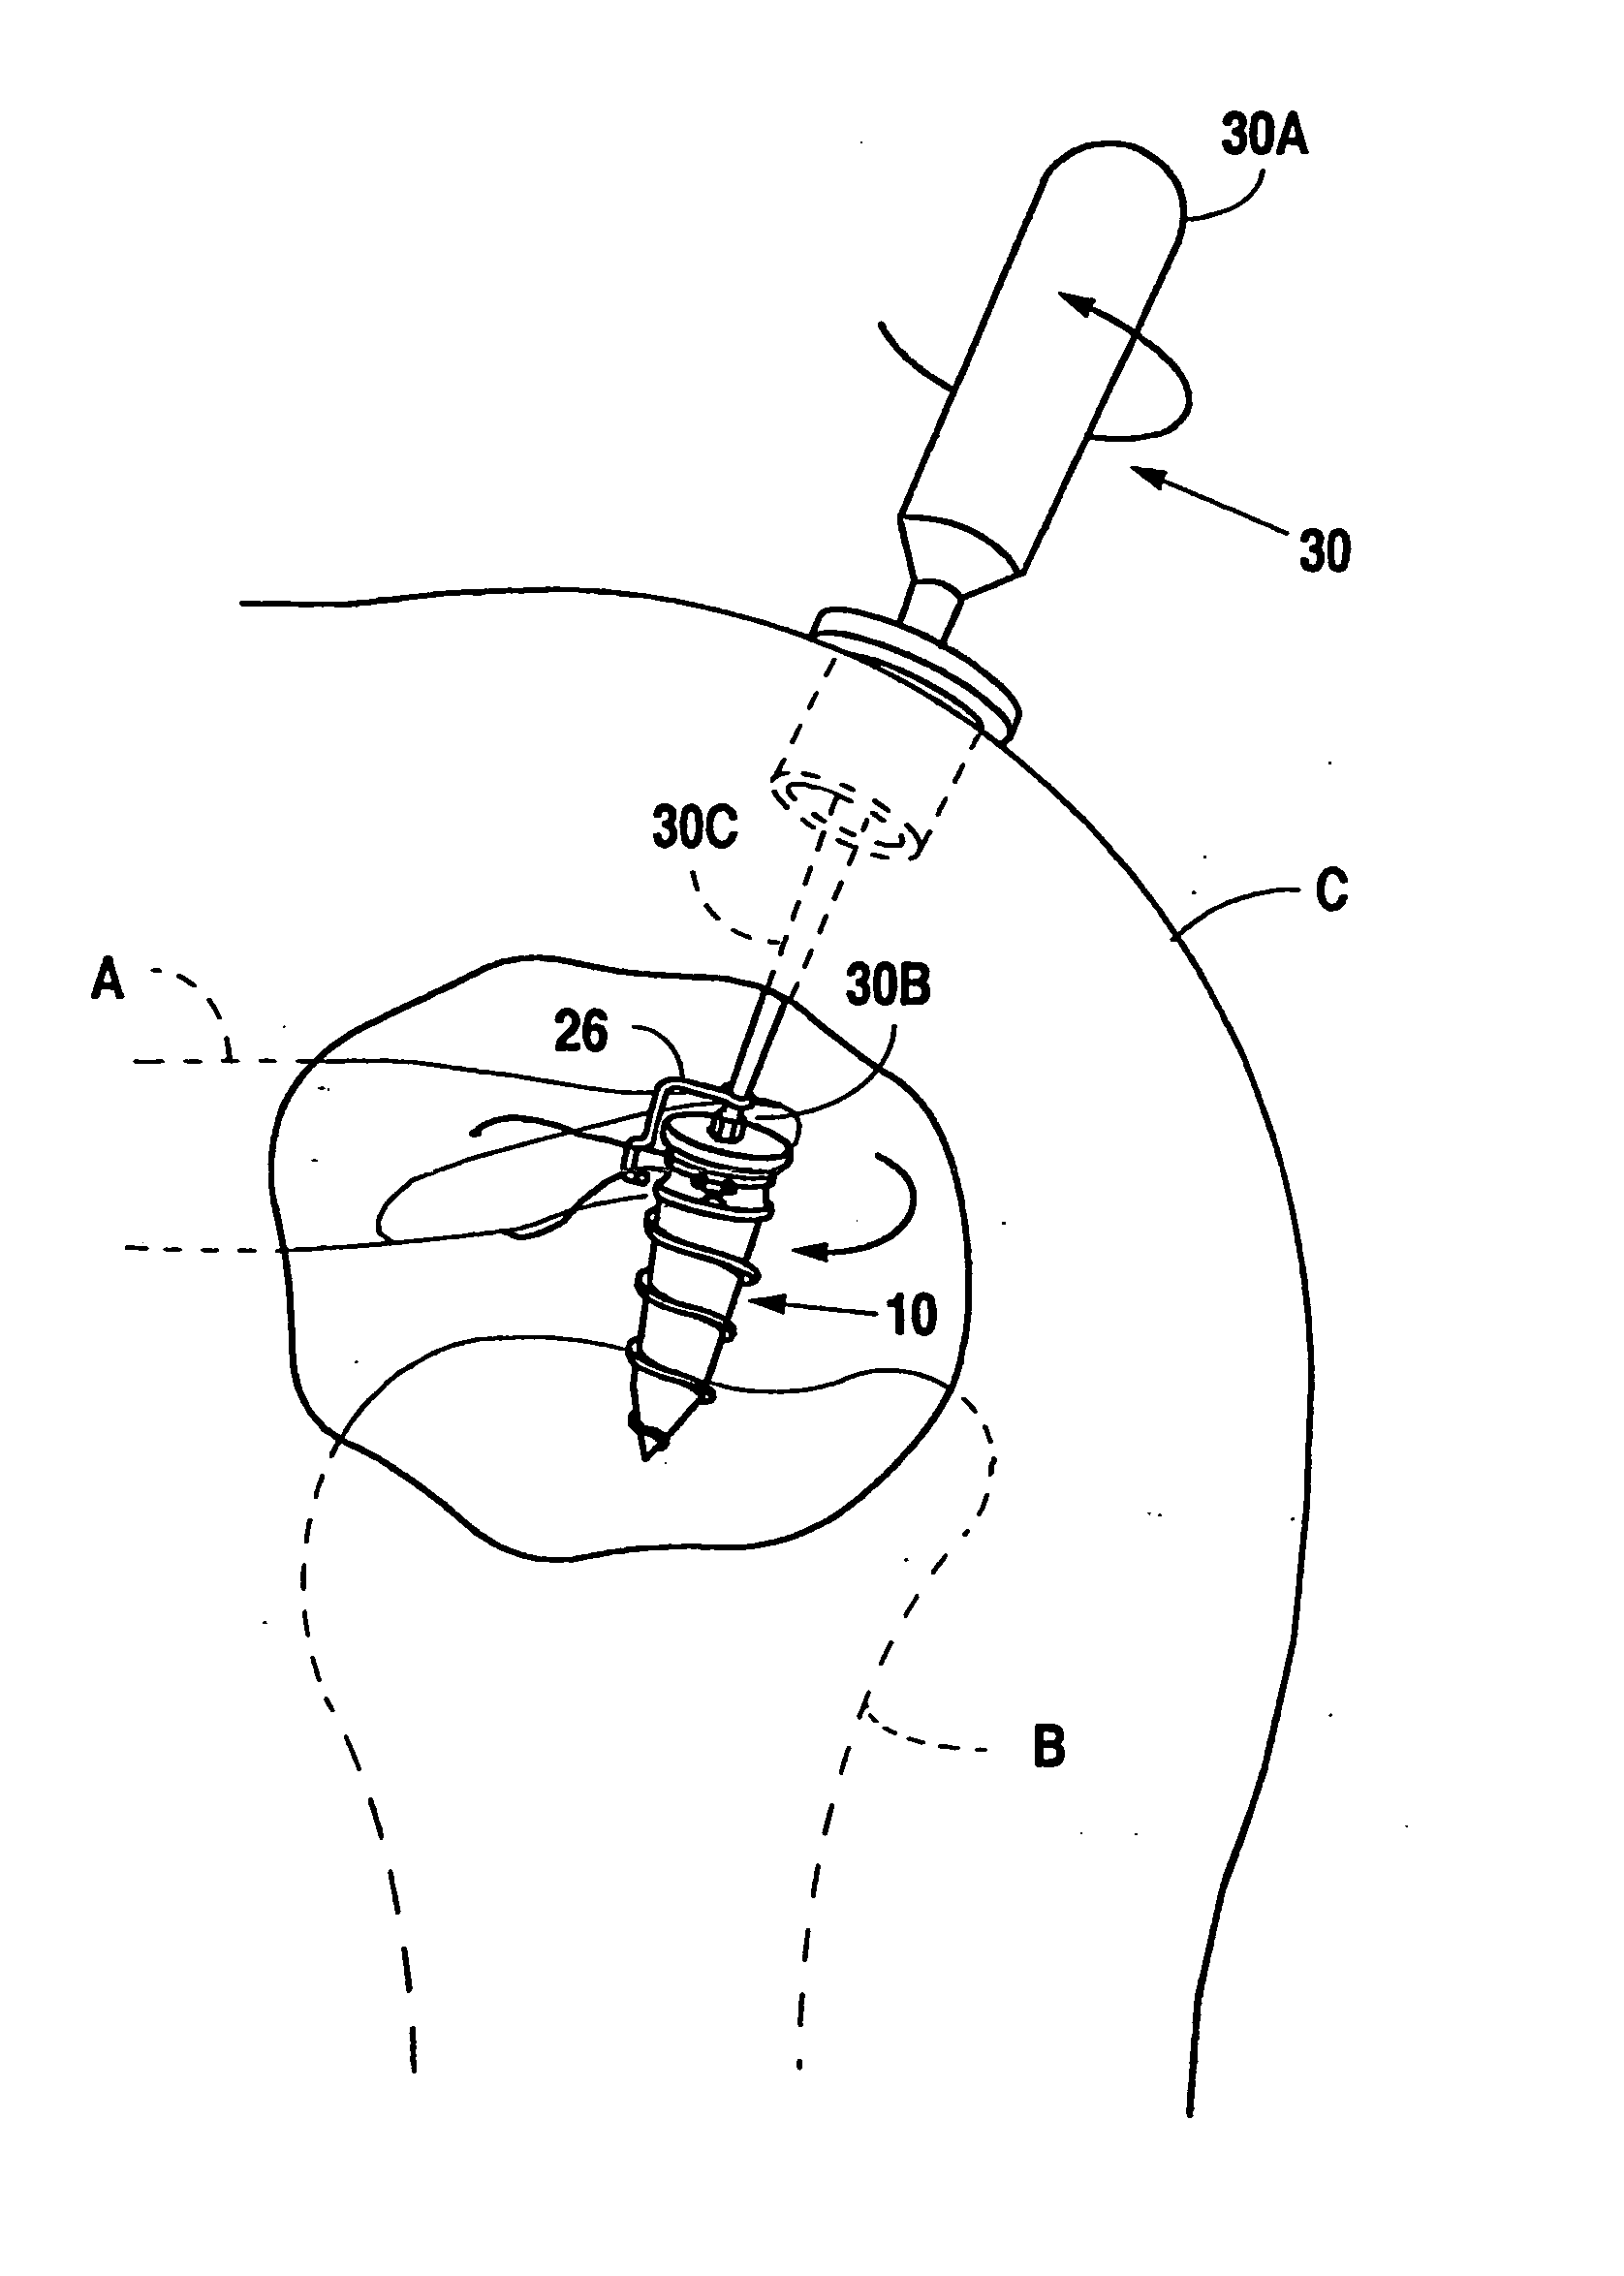 Suture anchor device, kit and method